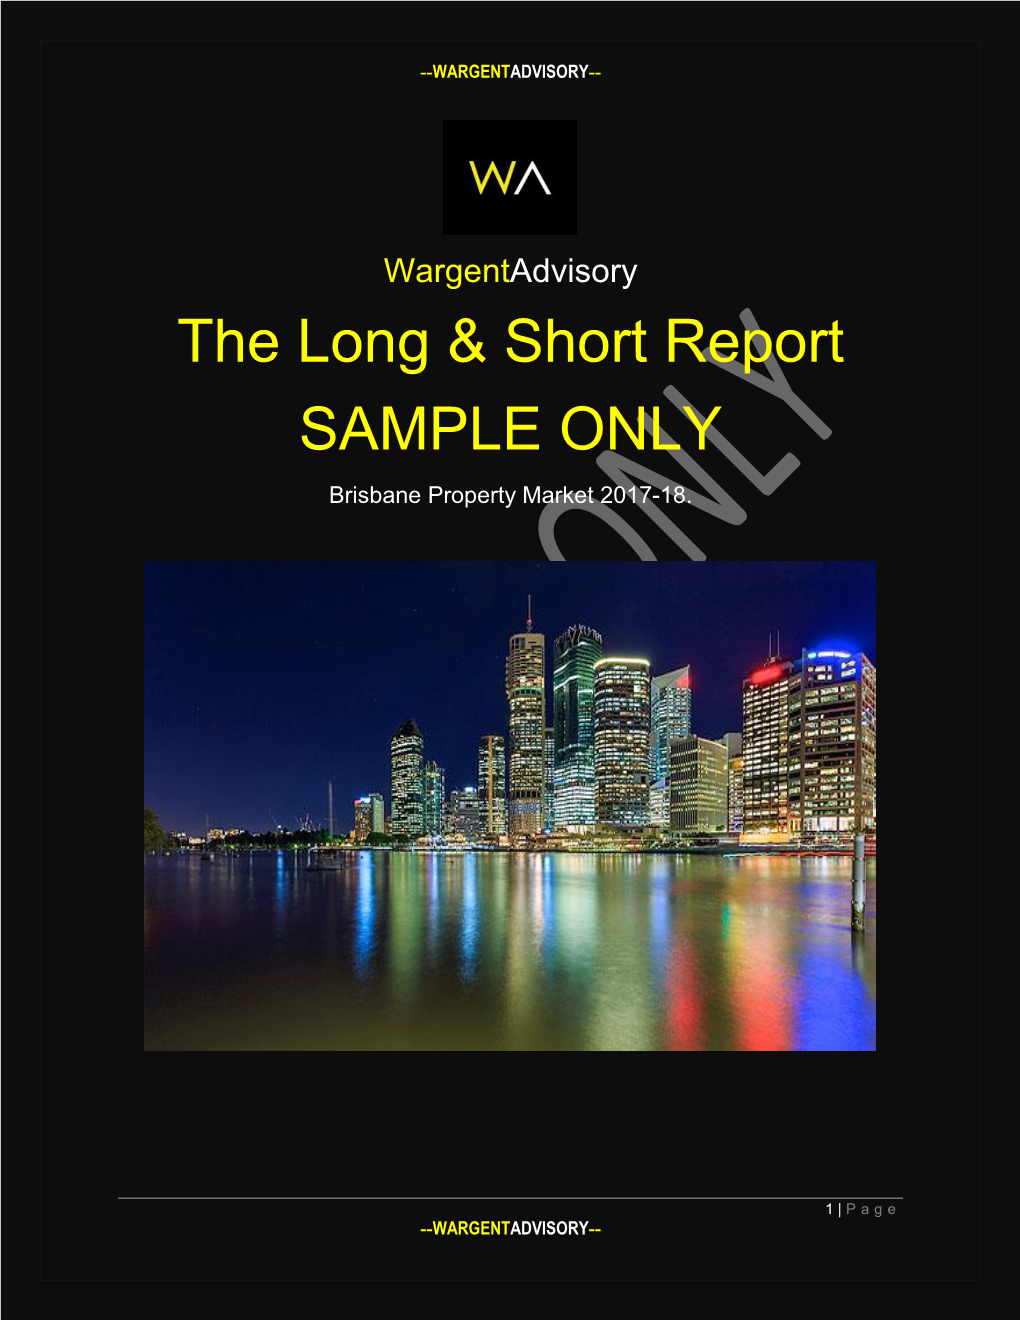 The Long & Short Report SAMPLE ONLY